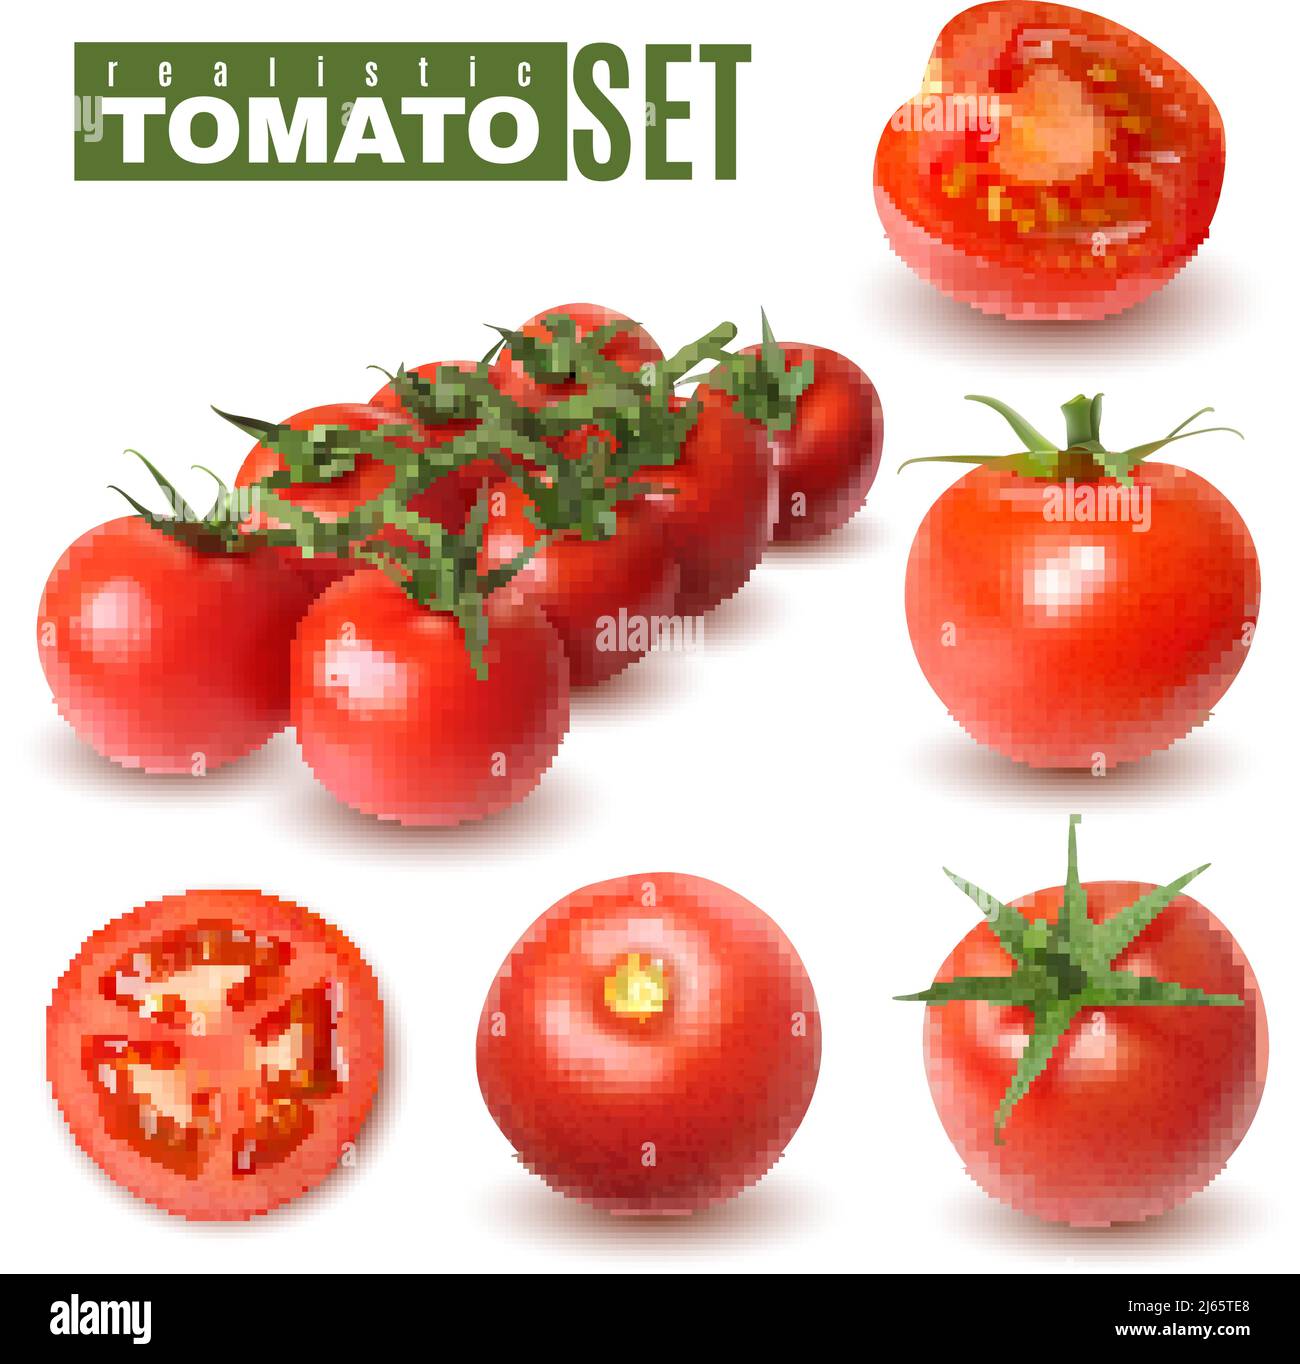 https://c8.alamy.com/comp/2J65TE8/realistic-tomato-set-of-isolated-images-with-single-tomato-fruits-and-groups-with-shadows-and-text-vector-illustration-2J65TE8.jpg